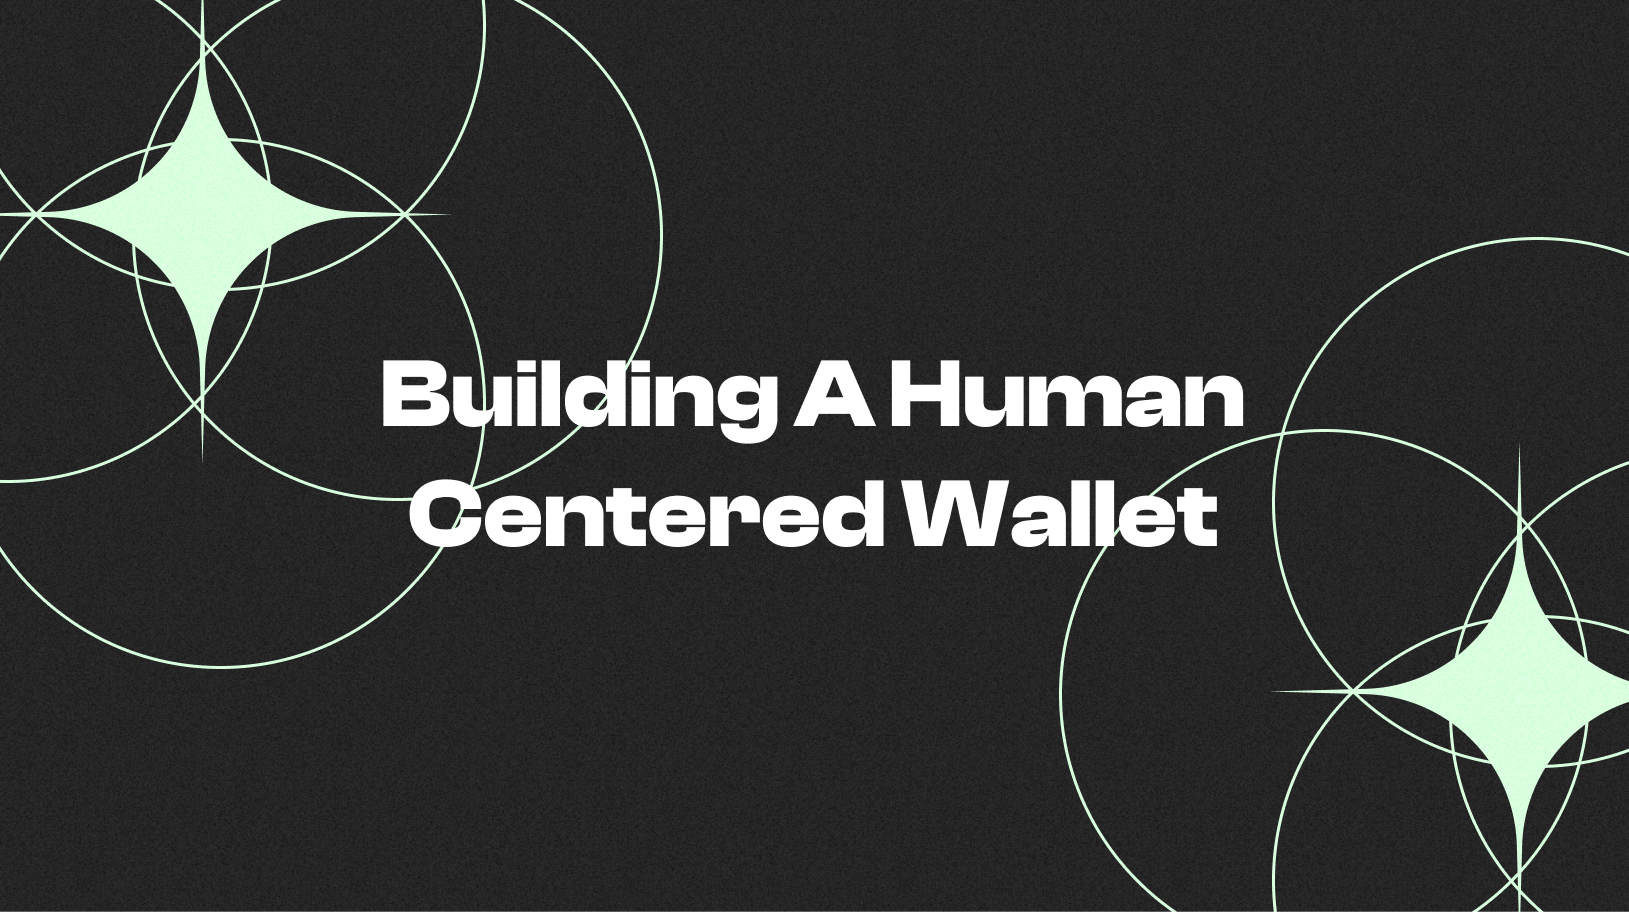 Building a Human Centered Wallet